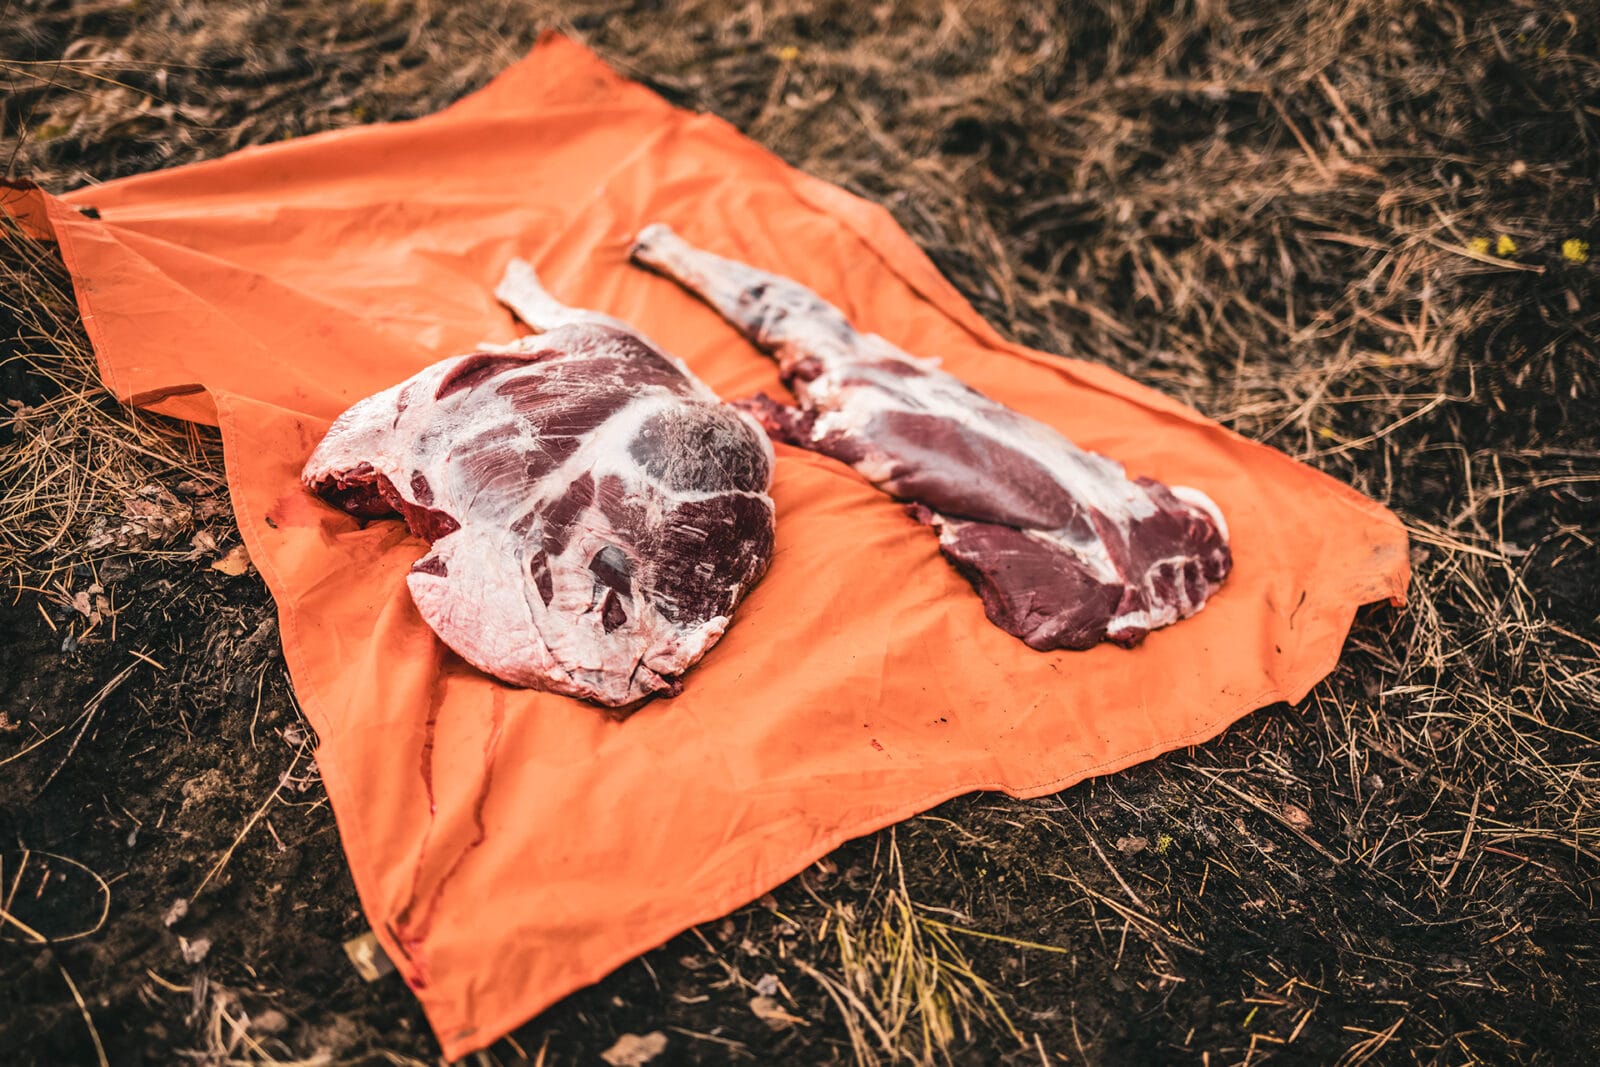 Two cuts of wild game meat lay on a orange tarp on top of grass.